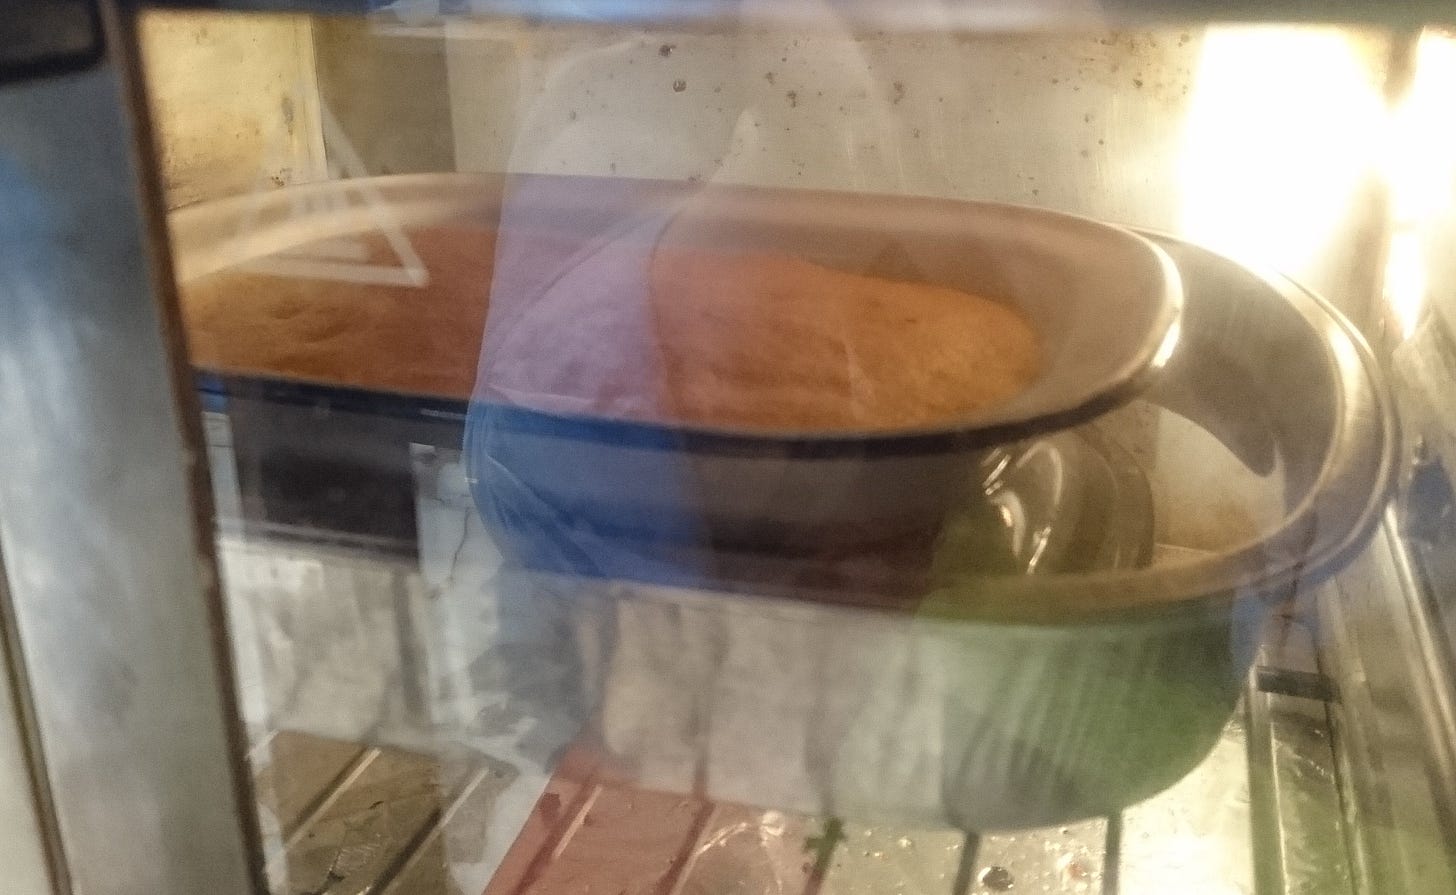 A custard with a light brown crust on the top cooks in a white square enama ldish. The slight flange is highlighted with a line of blue paint. The dish sits inside of an alumin tray water bath. Both rest on a rack inside of a toaster oven